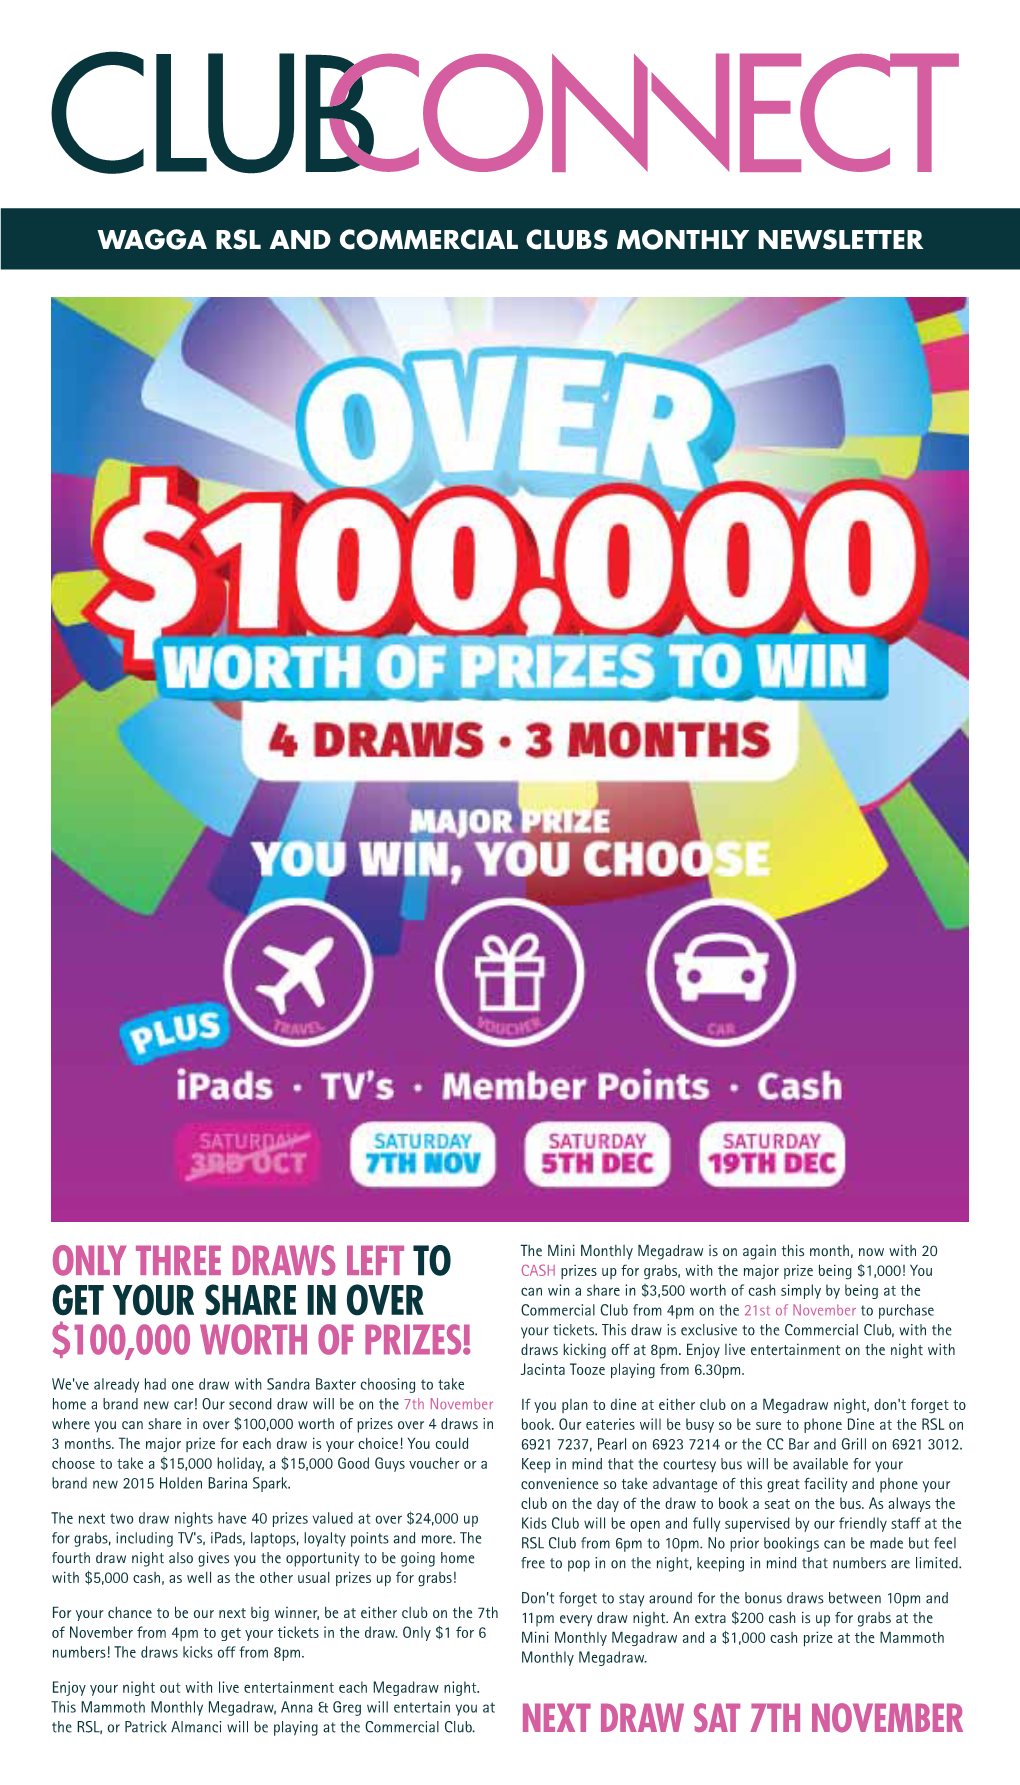 Only Three Draws Left to Get Your Share in Over $100,000